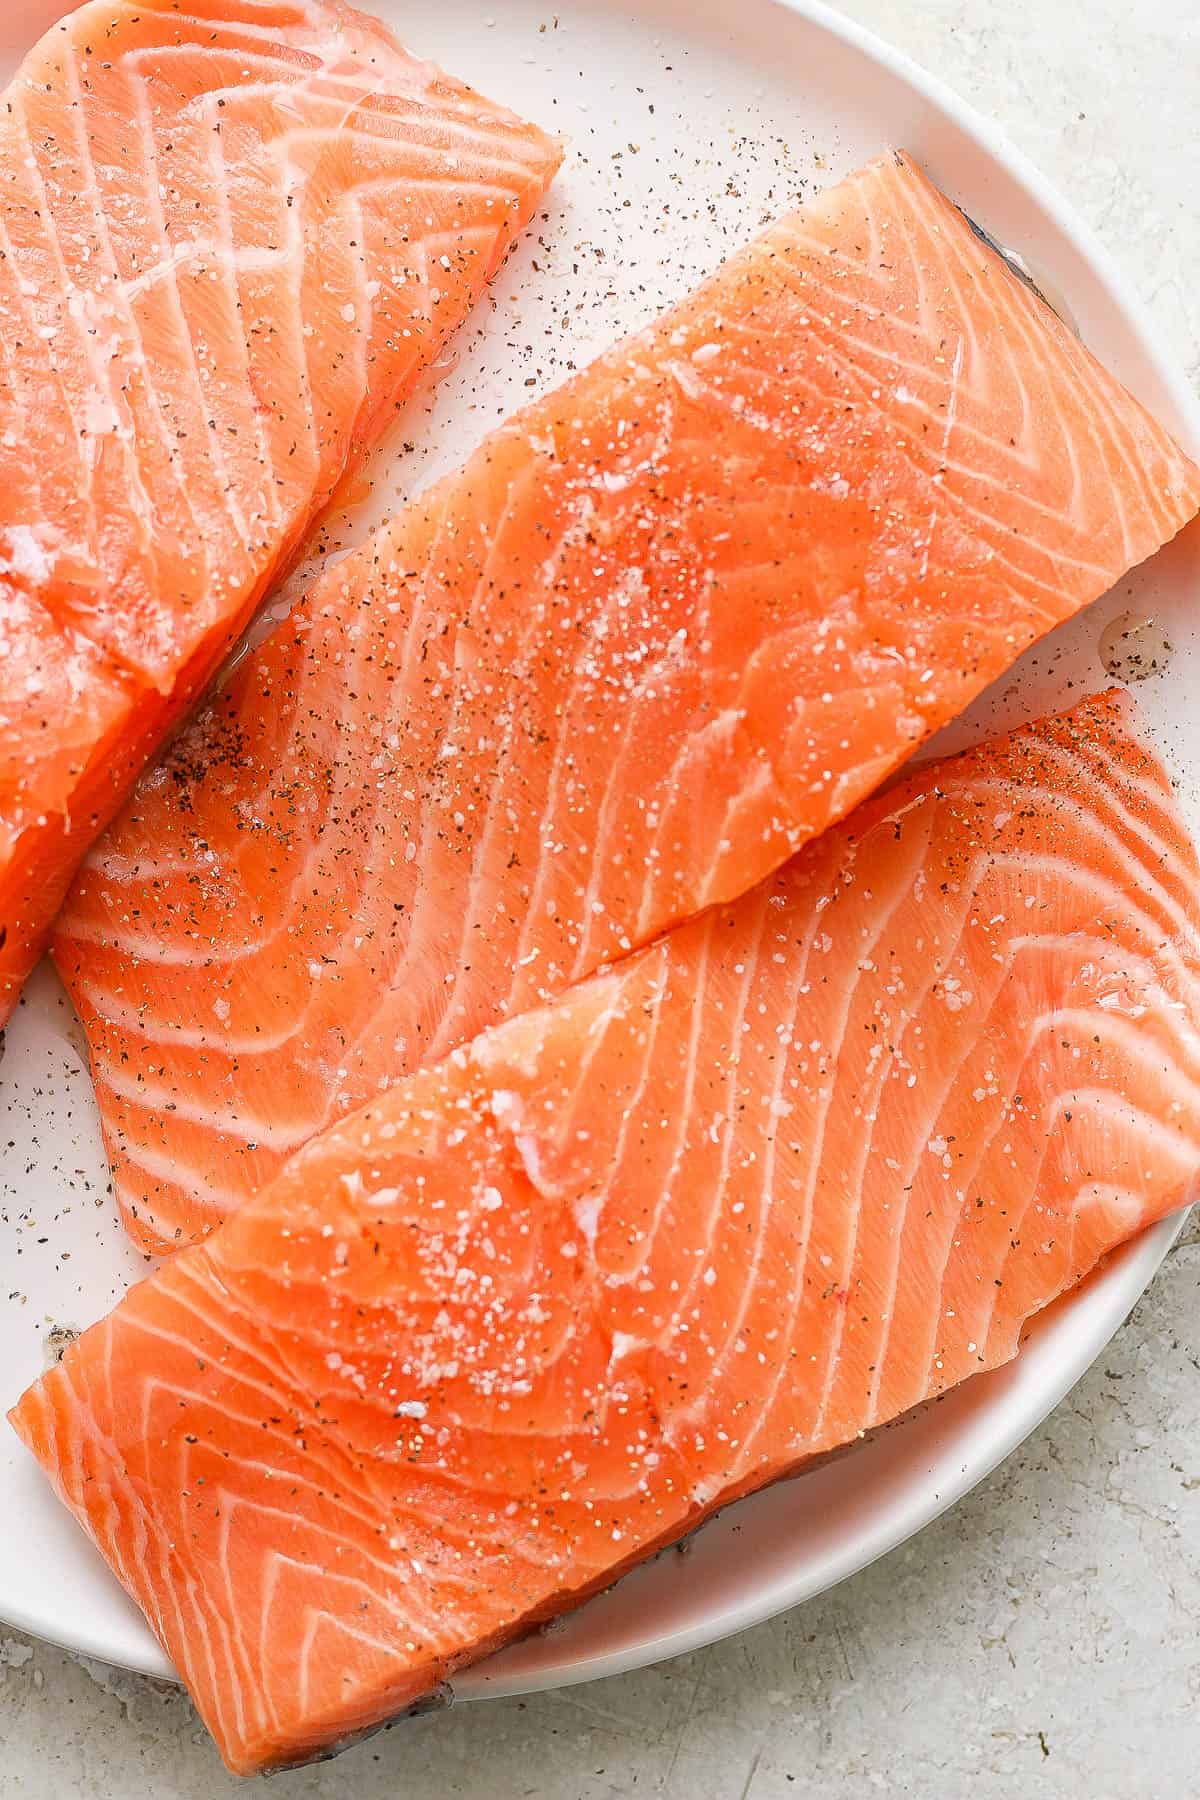 Raw salmon covered in oil, salt, and pepper on a plate.